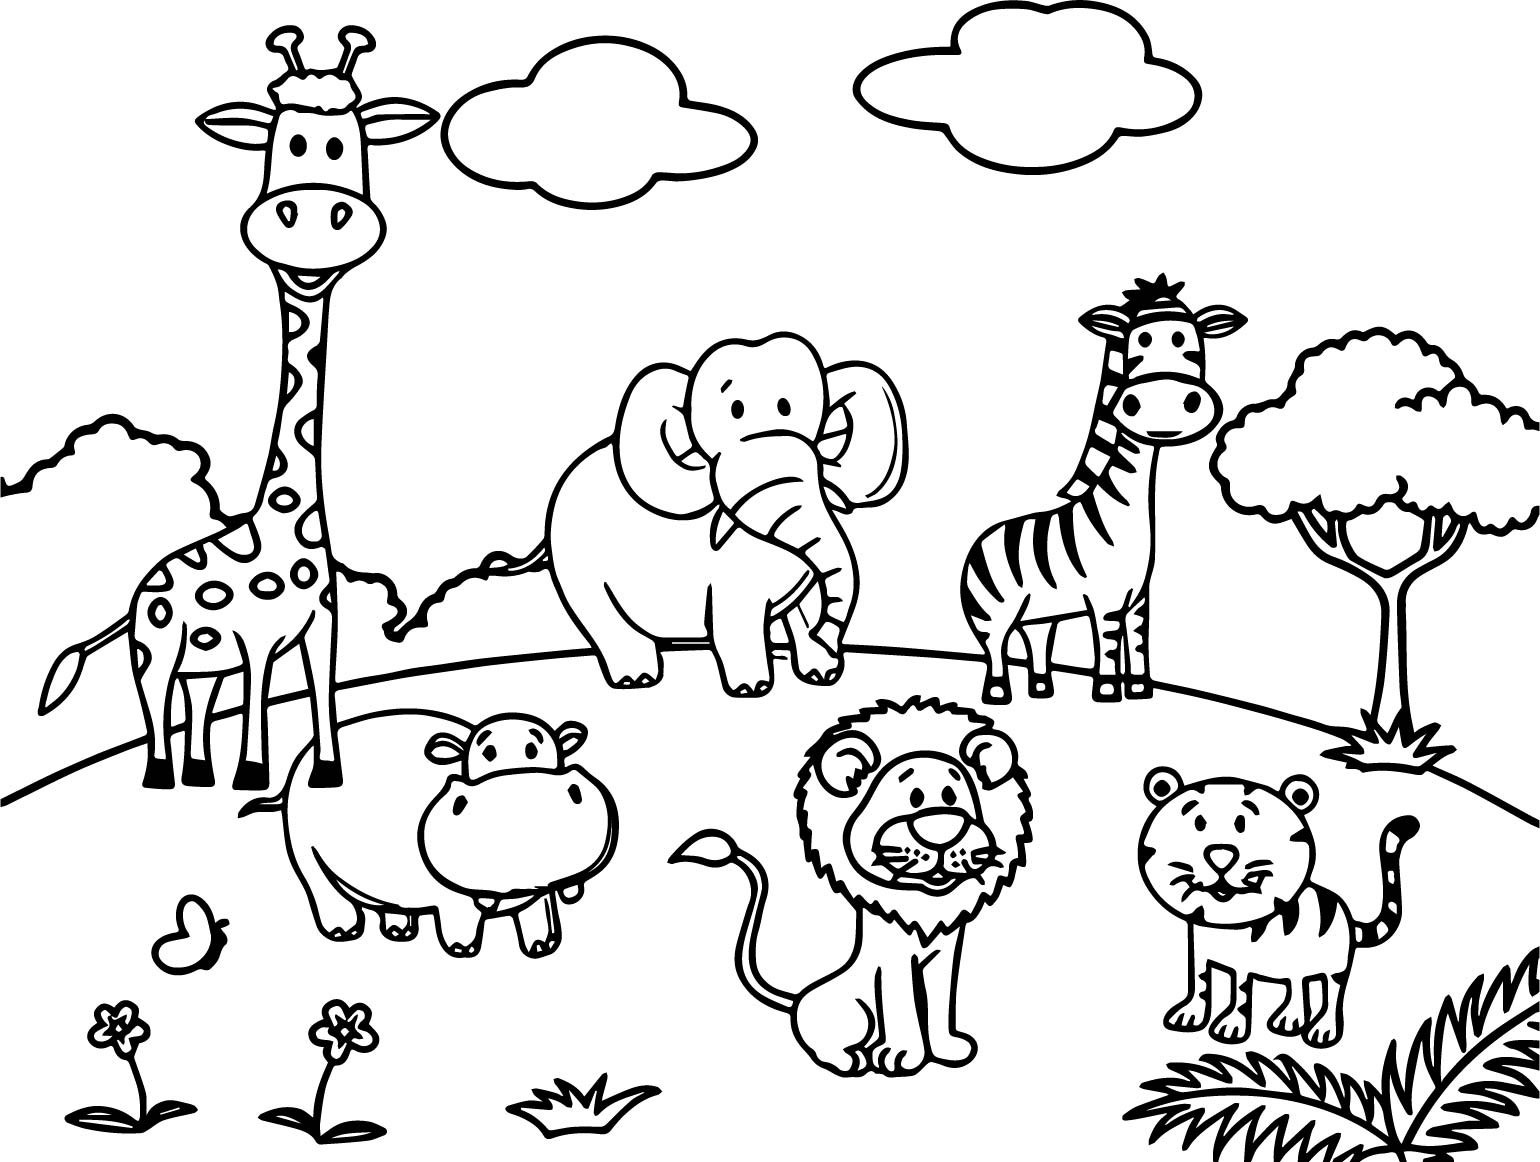 Zoo Coloring Sheets For Kids
 Zoo Coloring Page Coloring Pages For Children